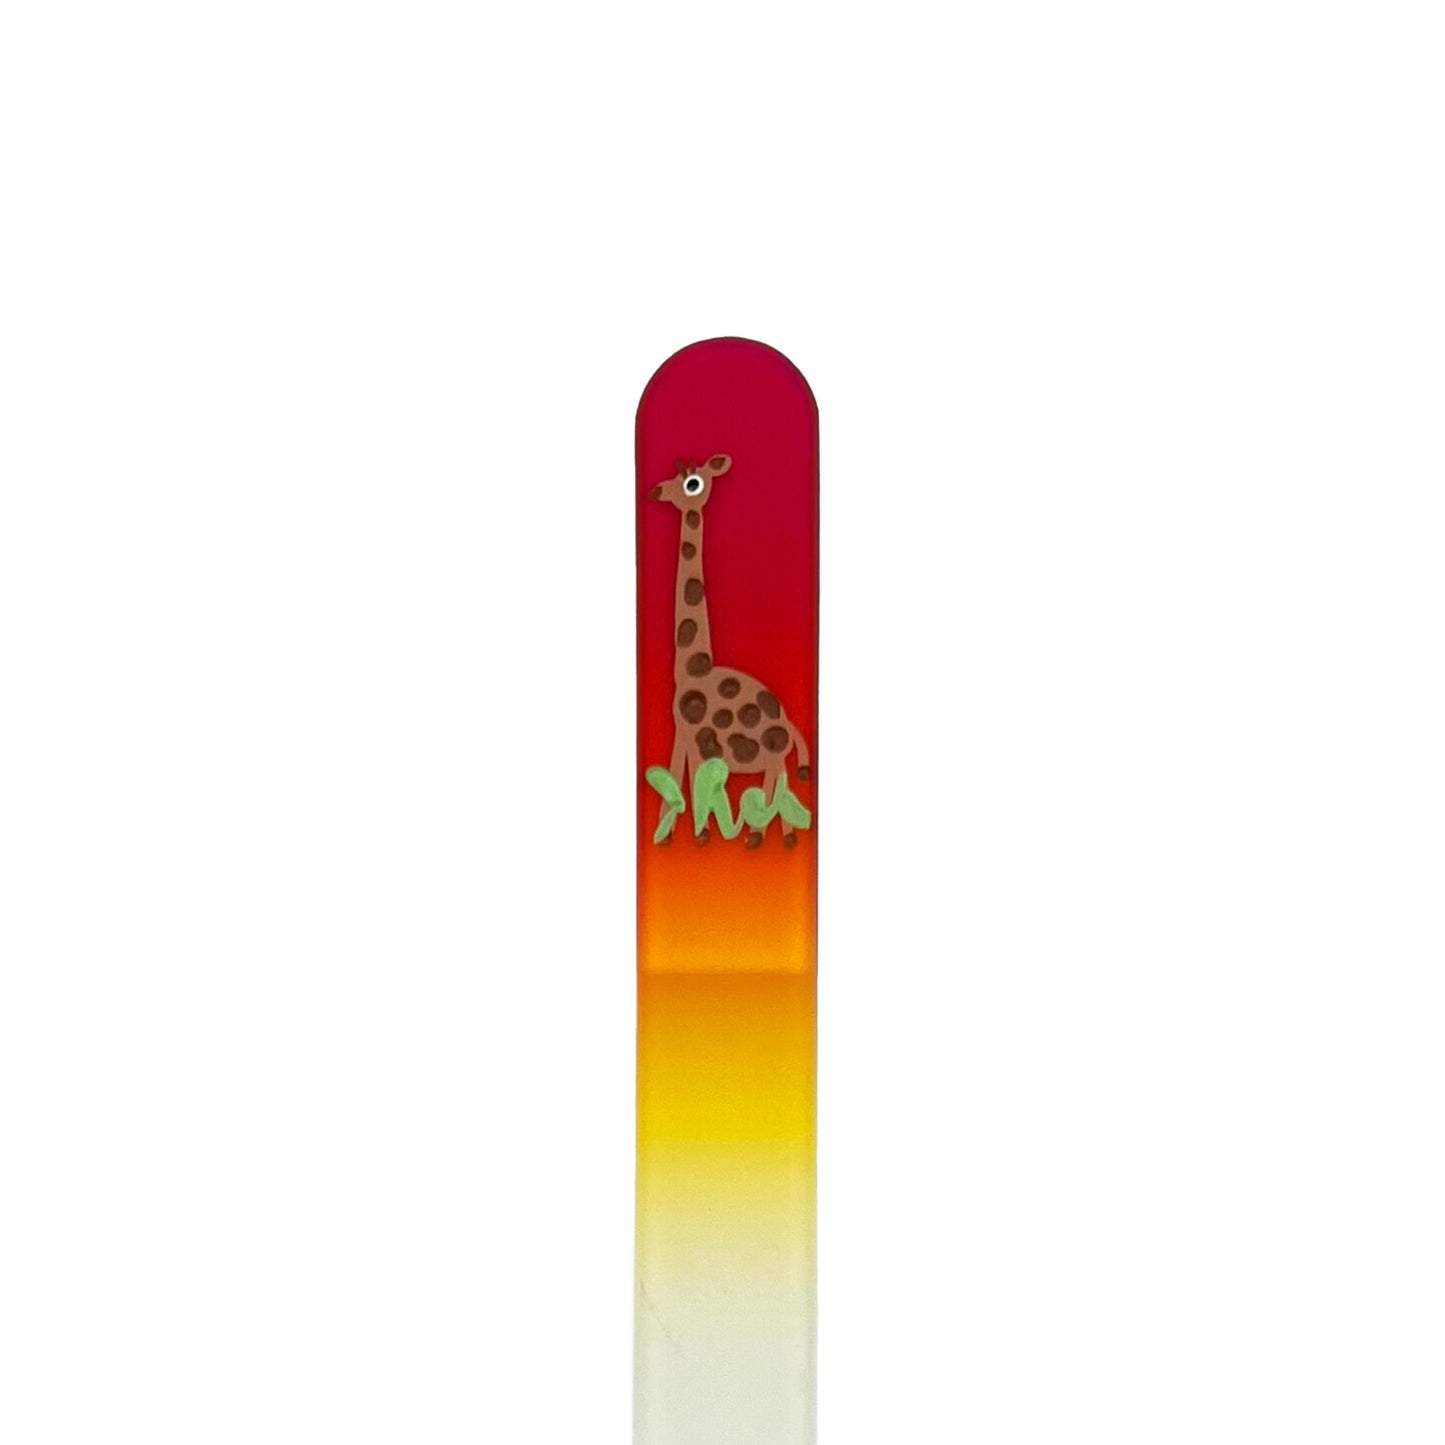 pink and yellow glass nail file with hand painted giraffe